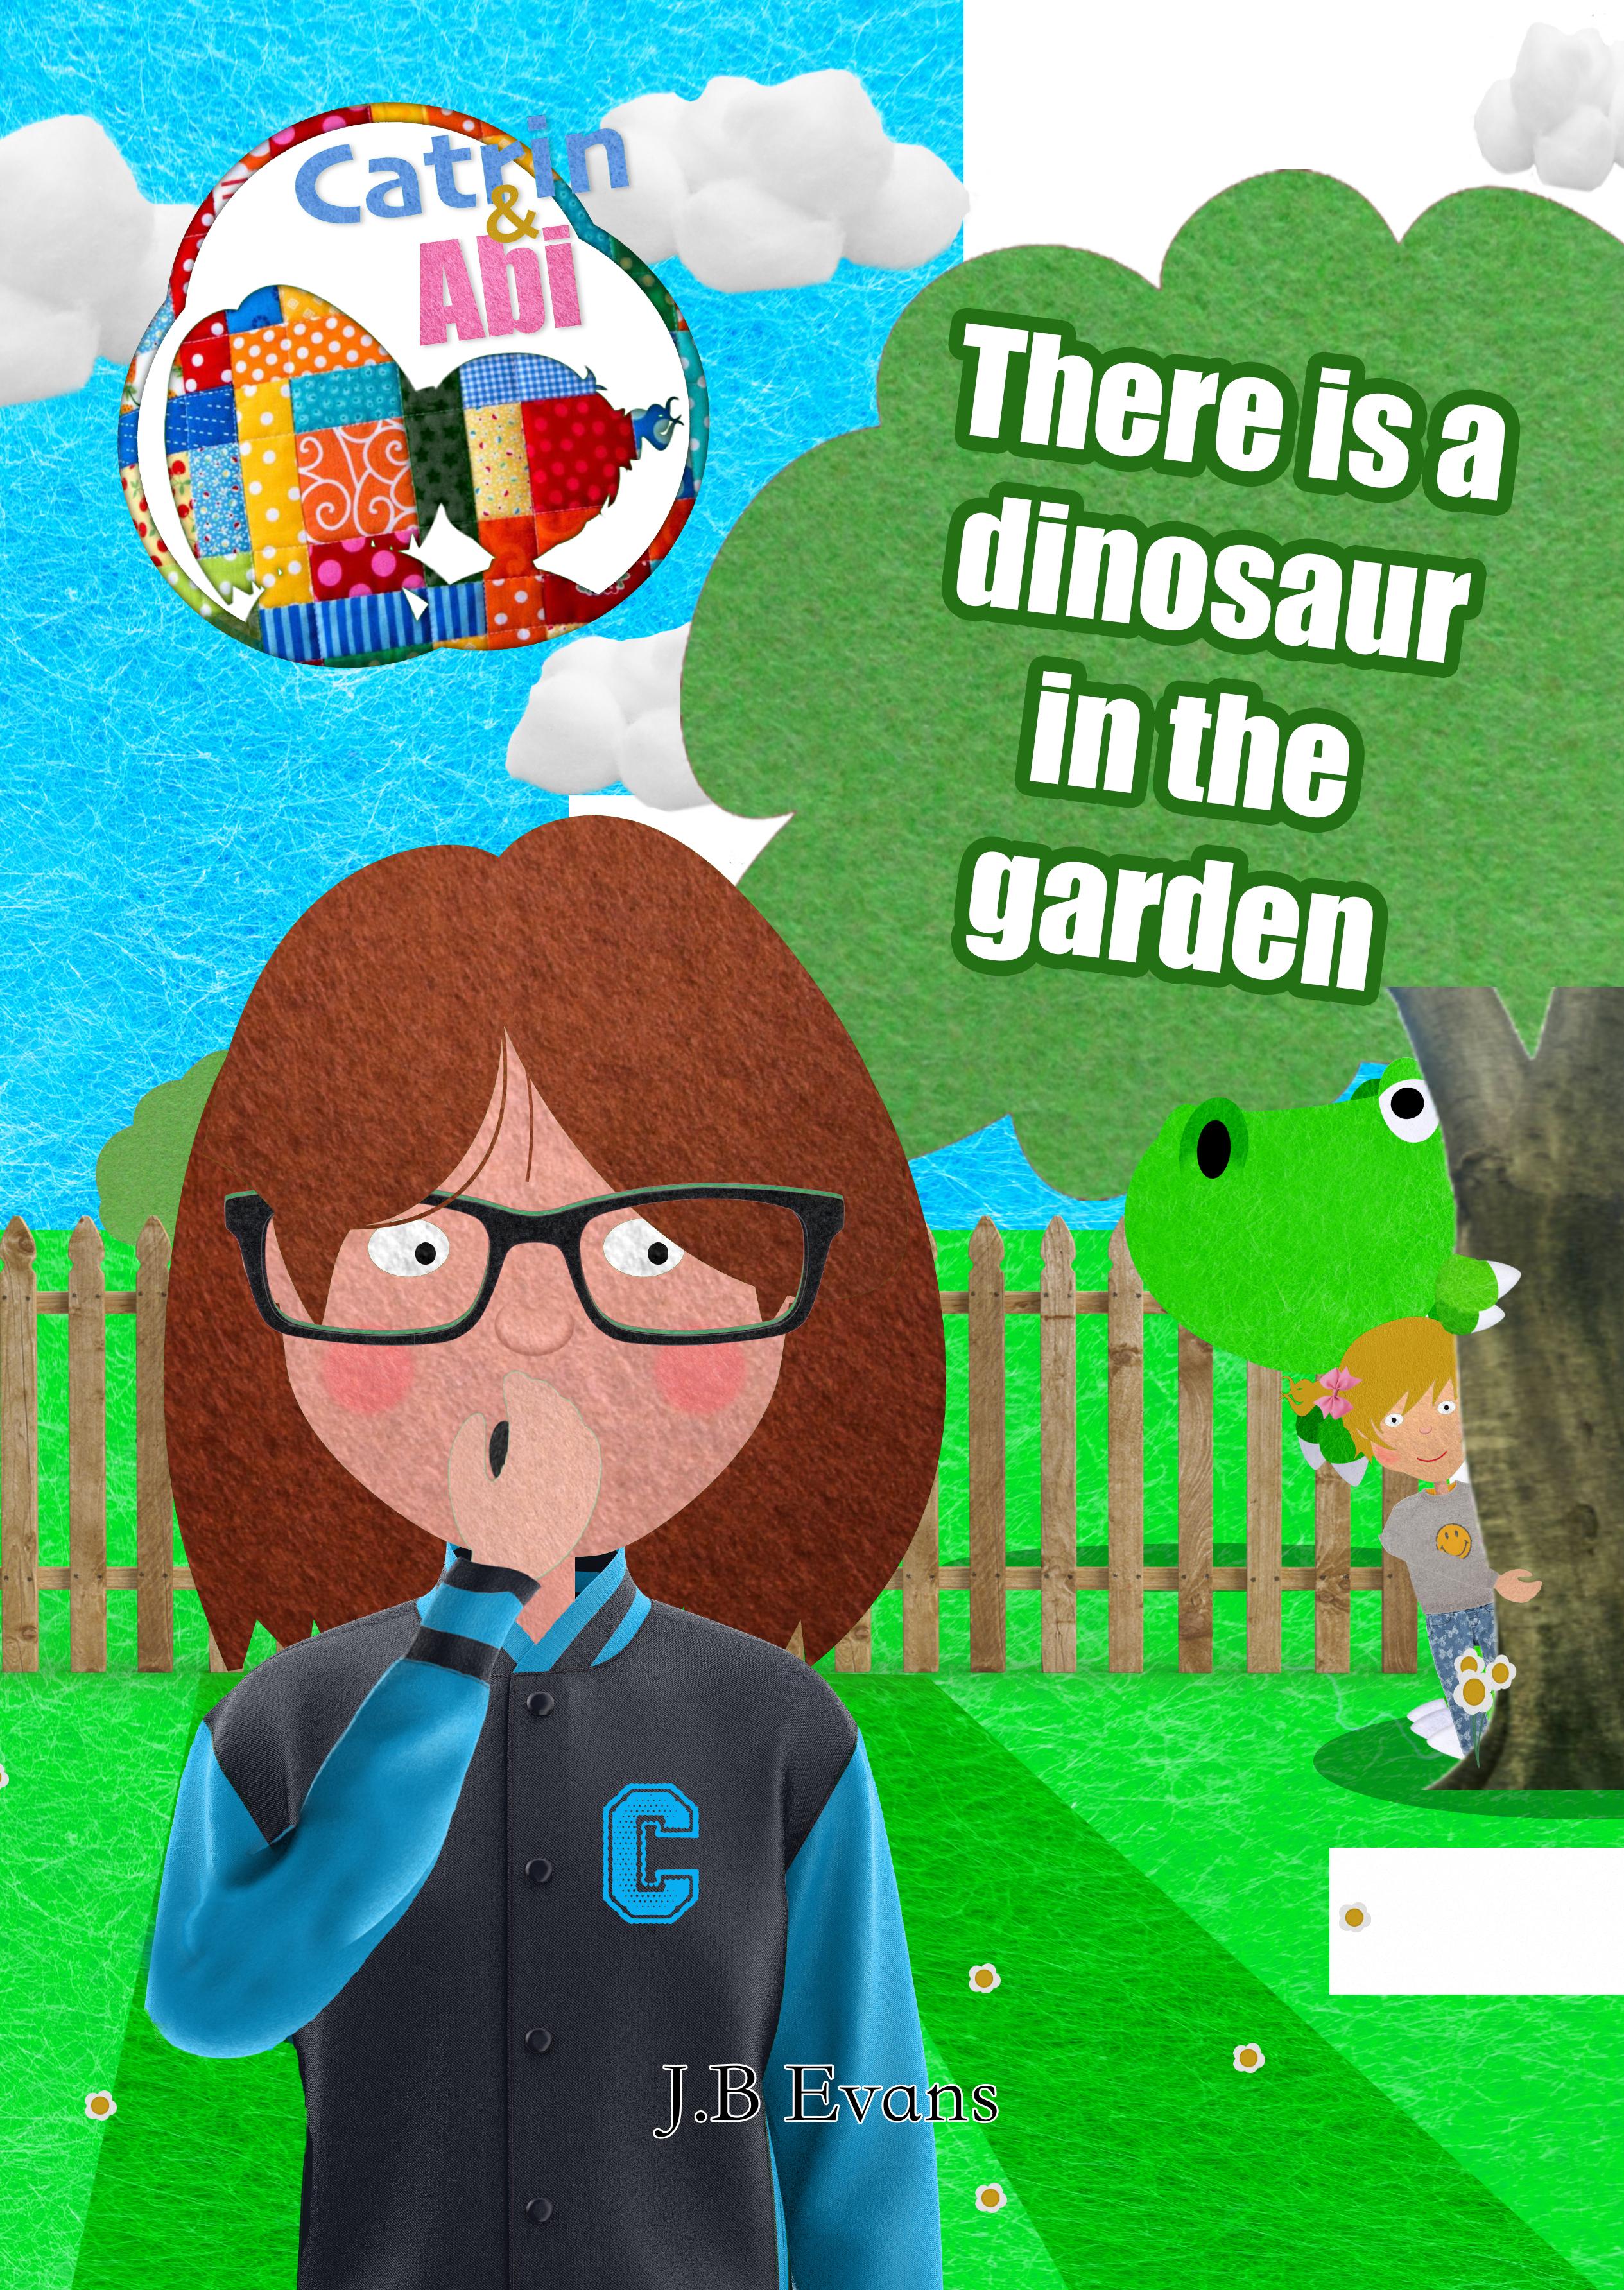 There is a dinosaur in the garden